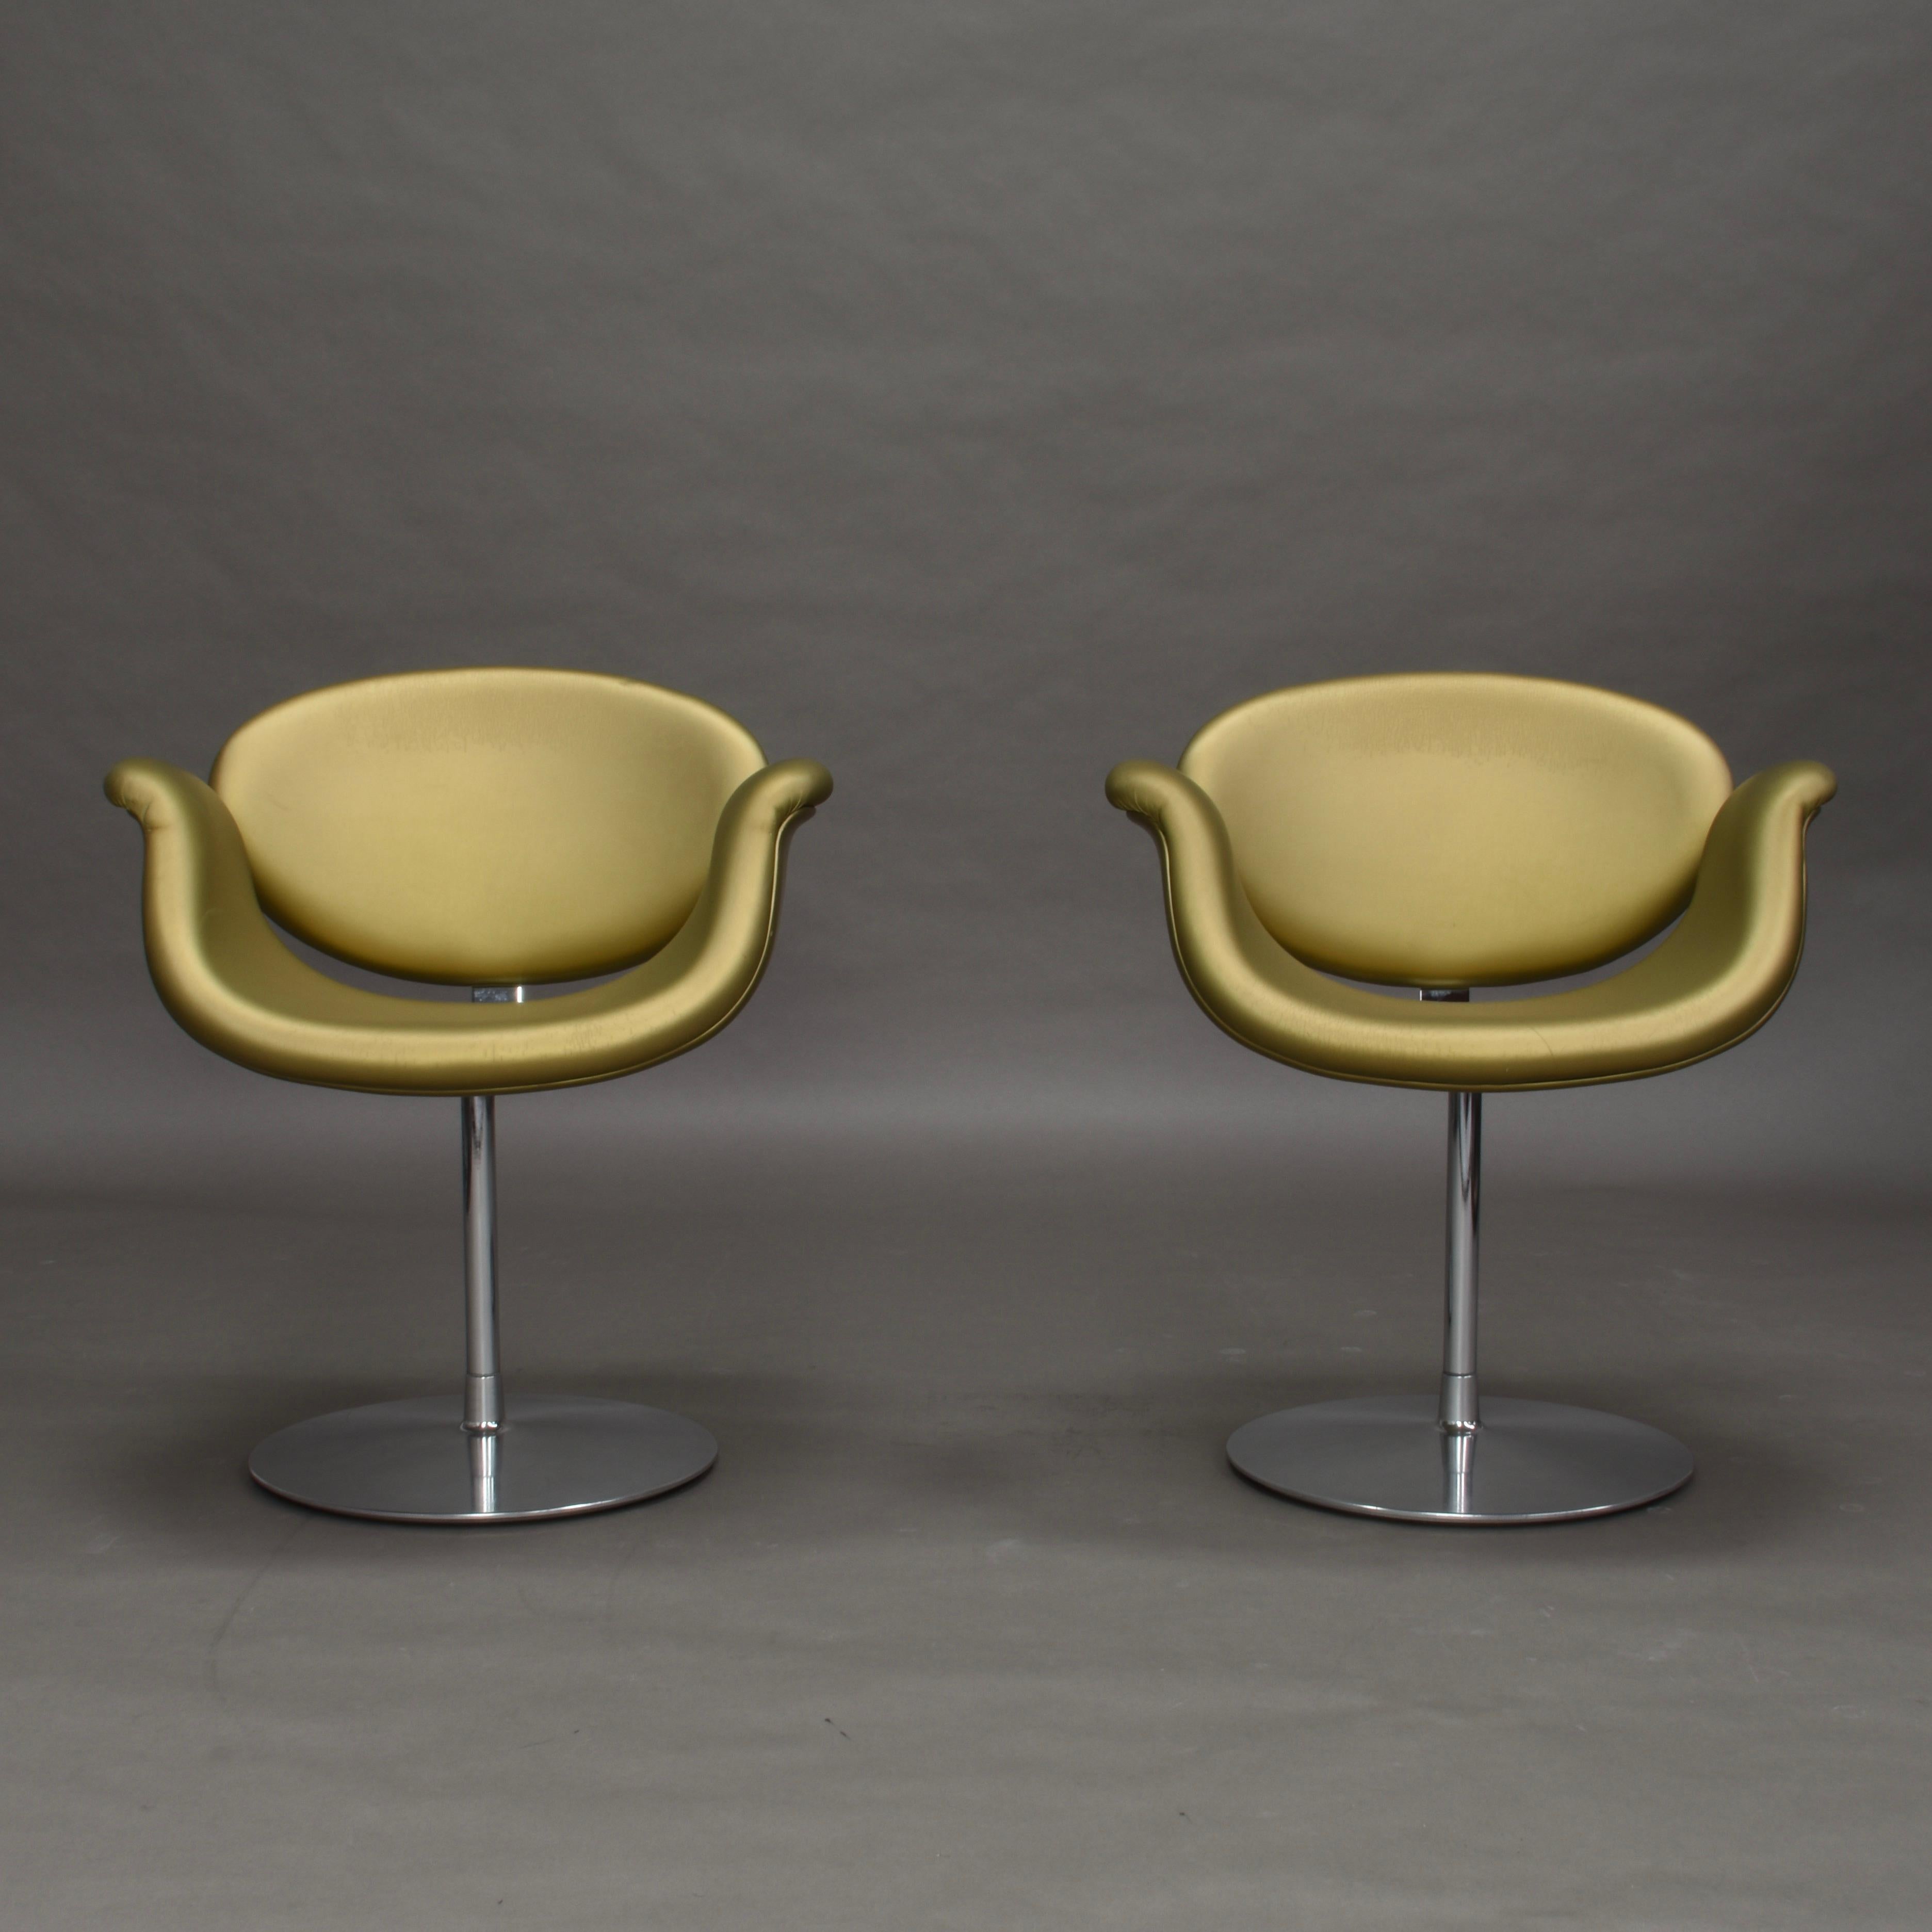 Pair of limited edition Little Tulip swivel chairs by Pierre Paulin for Artifort, Netherlands, 1965.

The chairs are produced as a limited edition in gold faux leather. The swivel base is made of chromed metal. The faux leather has some age